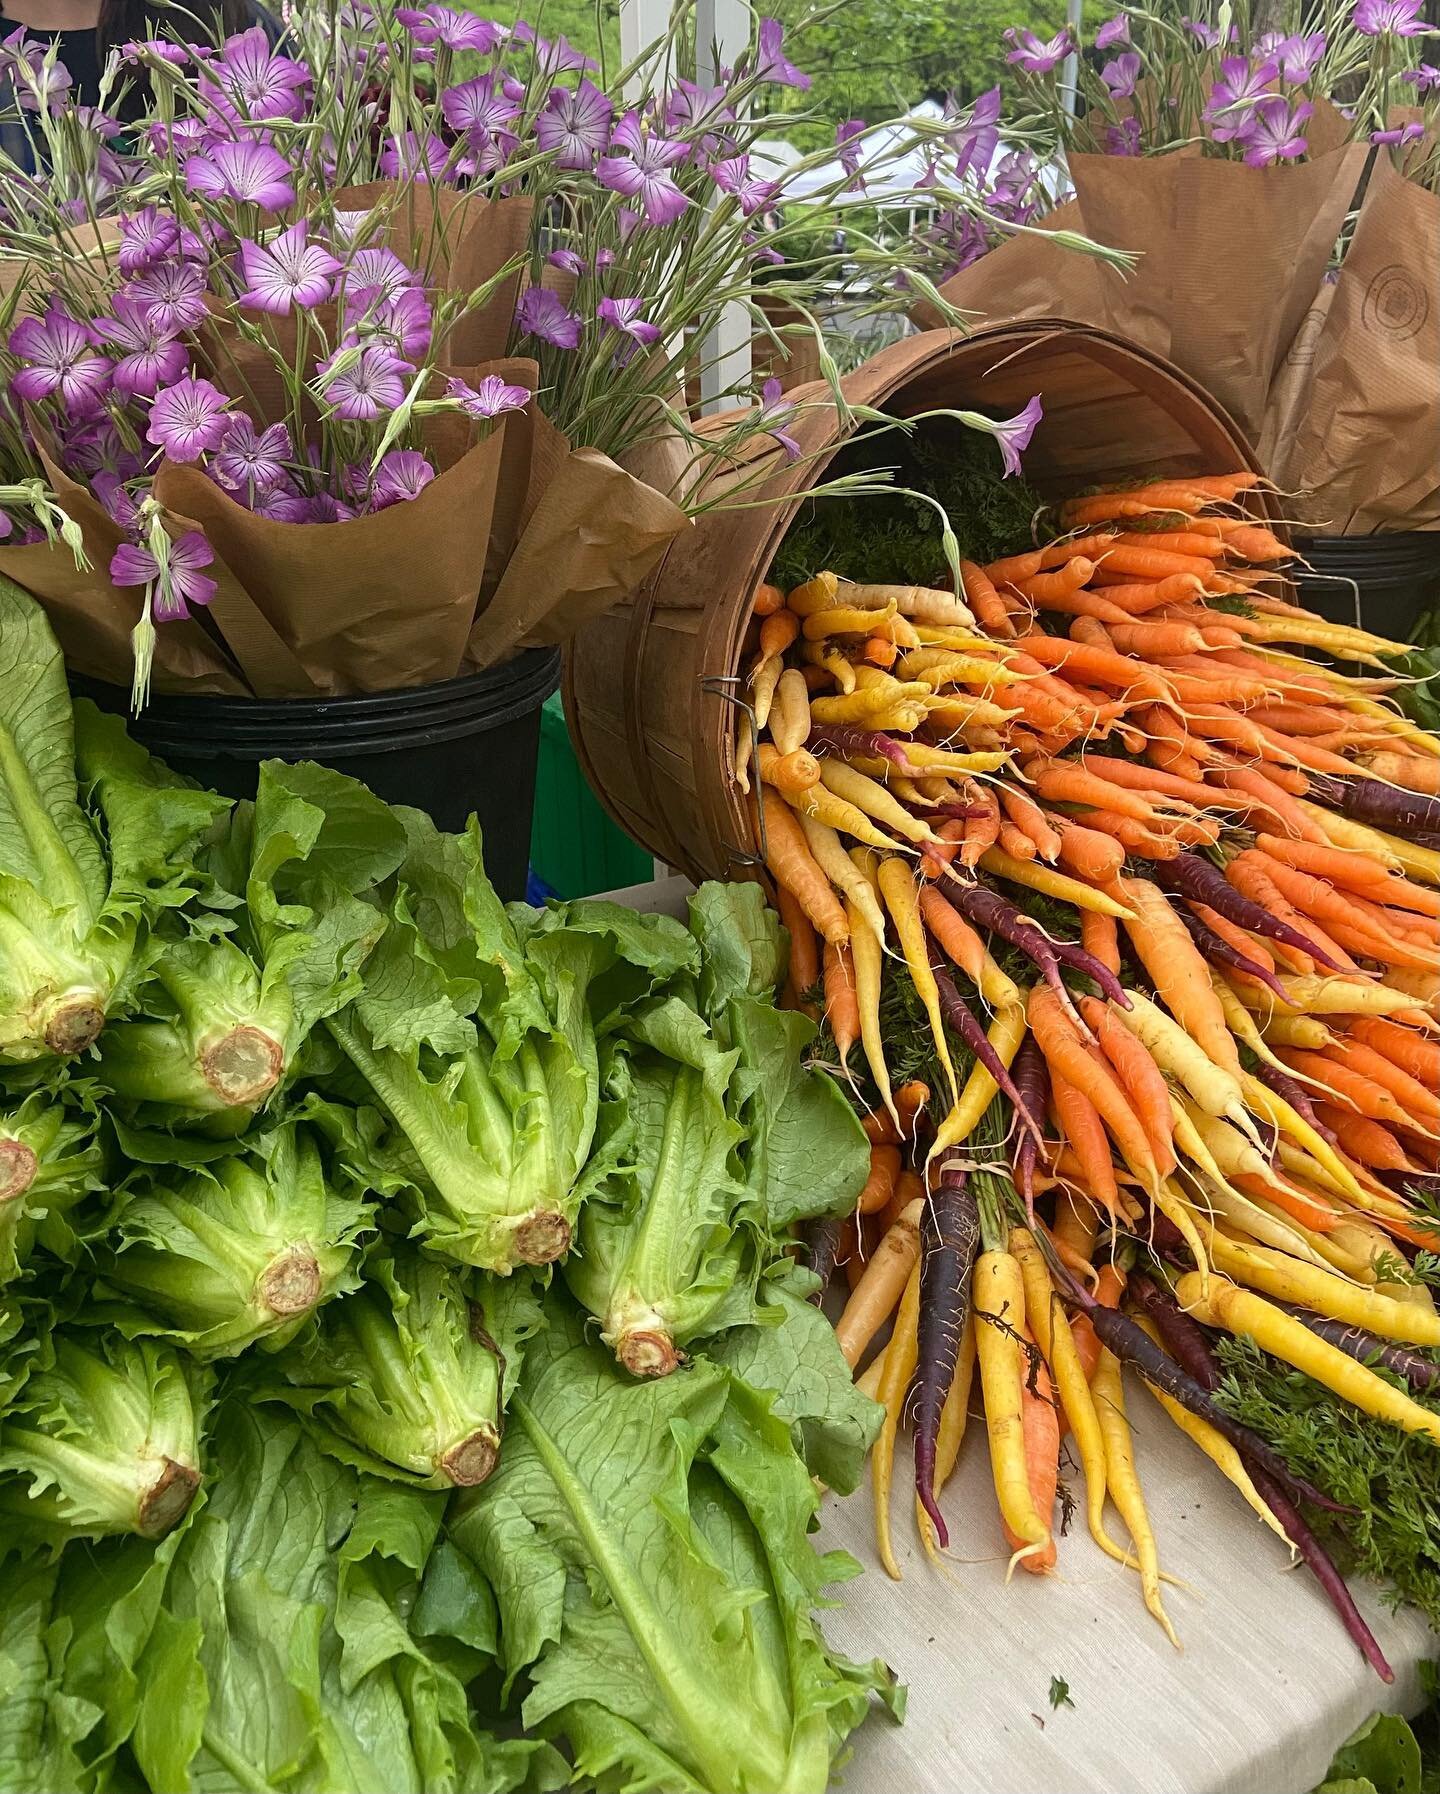 Farmers Market Season is HERE&hellip; Let&rsquo;s Eat LOCAL! 
Shop Freedom Farmers Market Every Saturday 8:30am-Noon
May 6th  is loaded with all your local food needs.
See who&rsquo;s at market this Saturday:
 
POP UP VENDOR:  @sweethoneatlanta get y